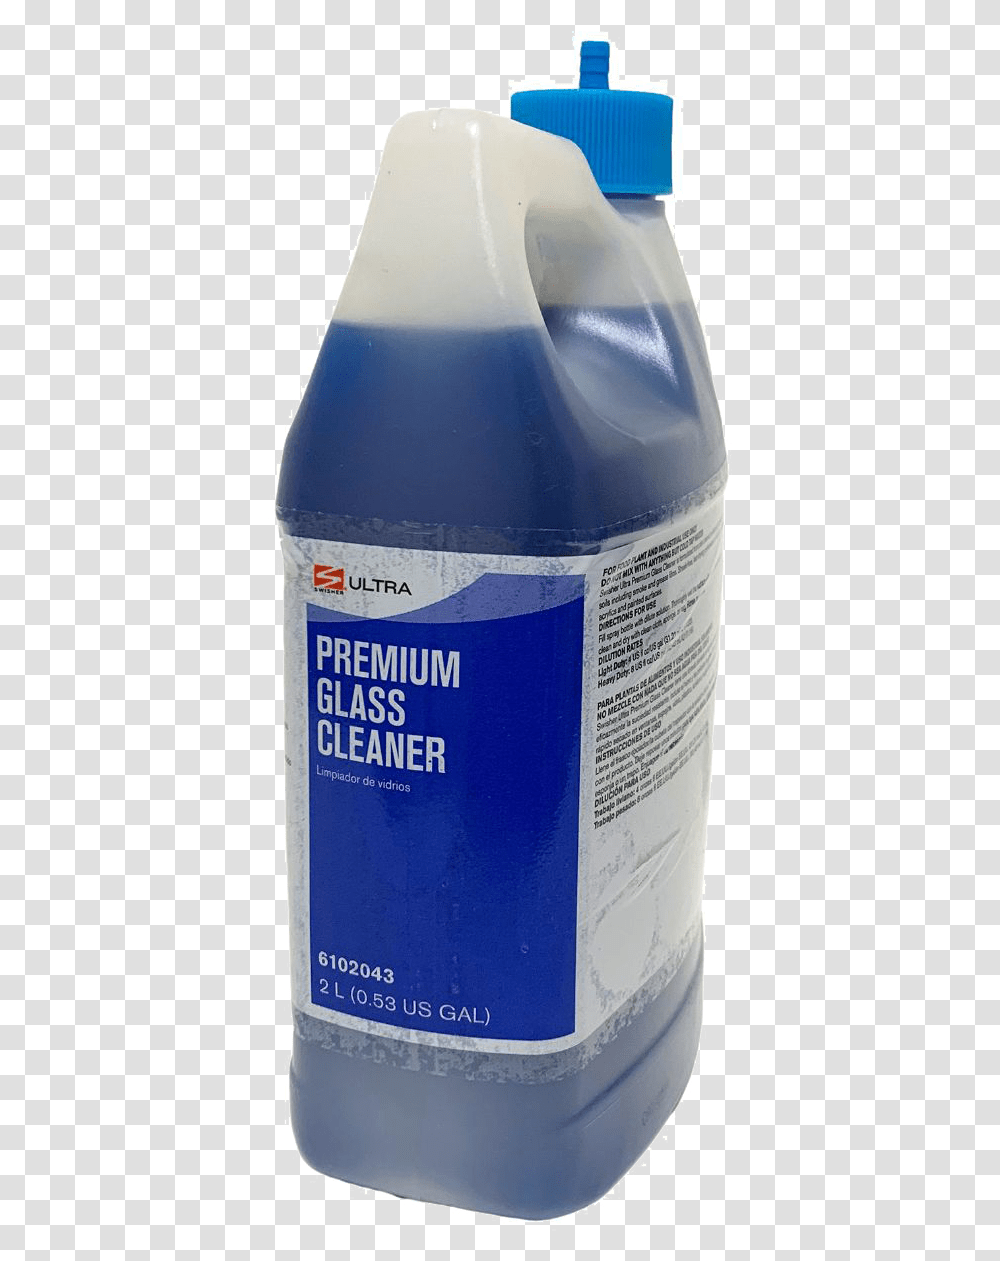 Swisher Ultra Premium Glass Cleaner Household Cleaning Supply, Milk, Beverage, Bottle, Beer Transparent Png